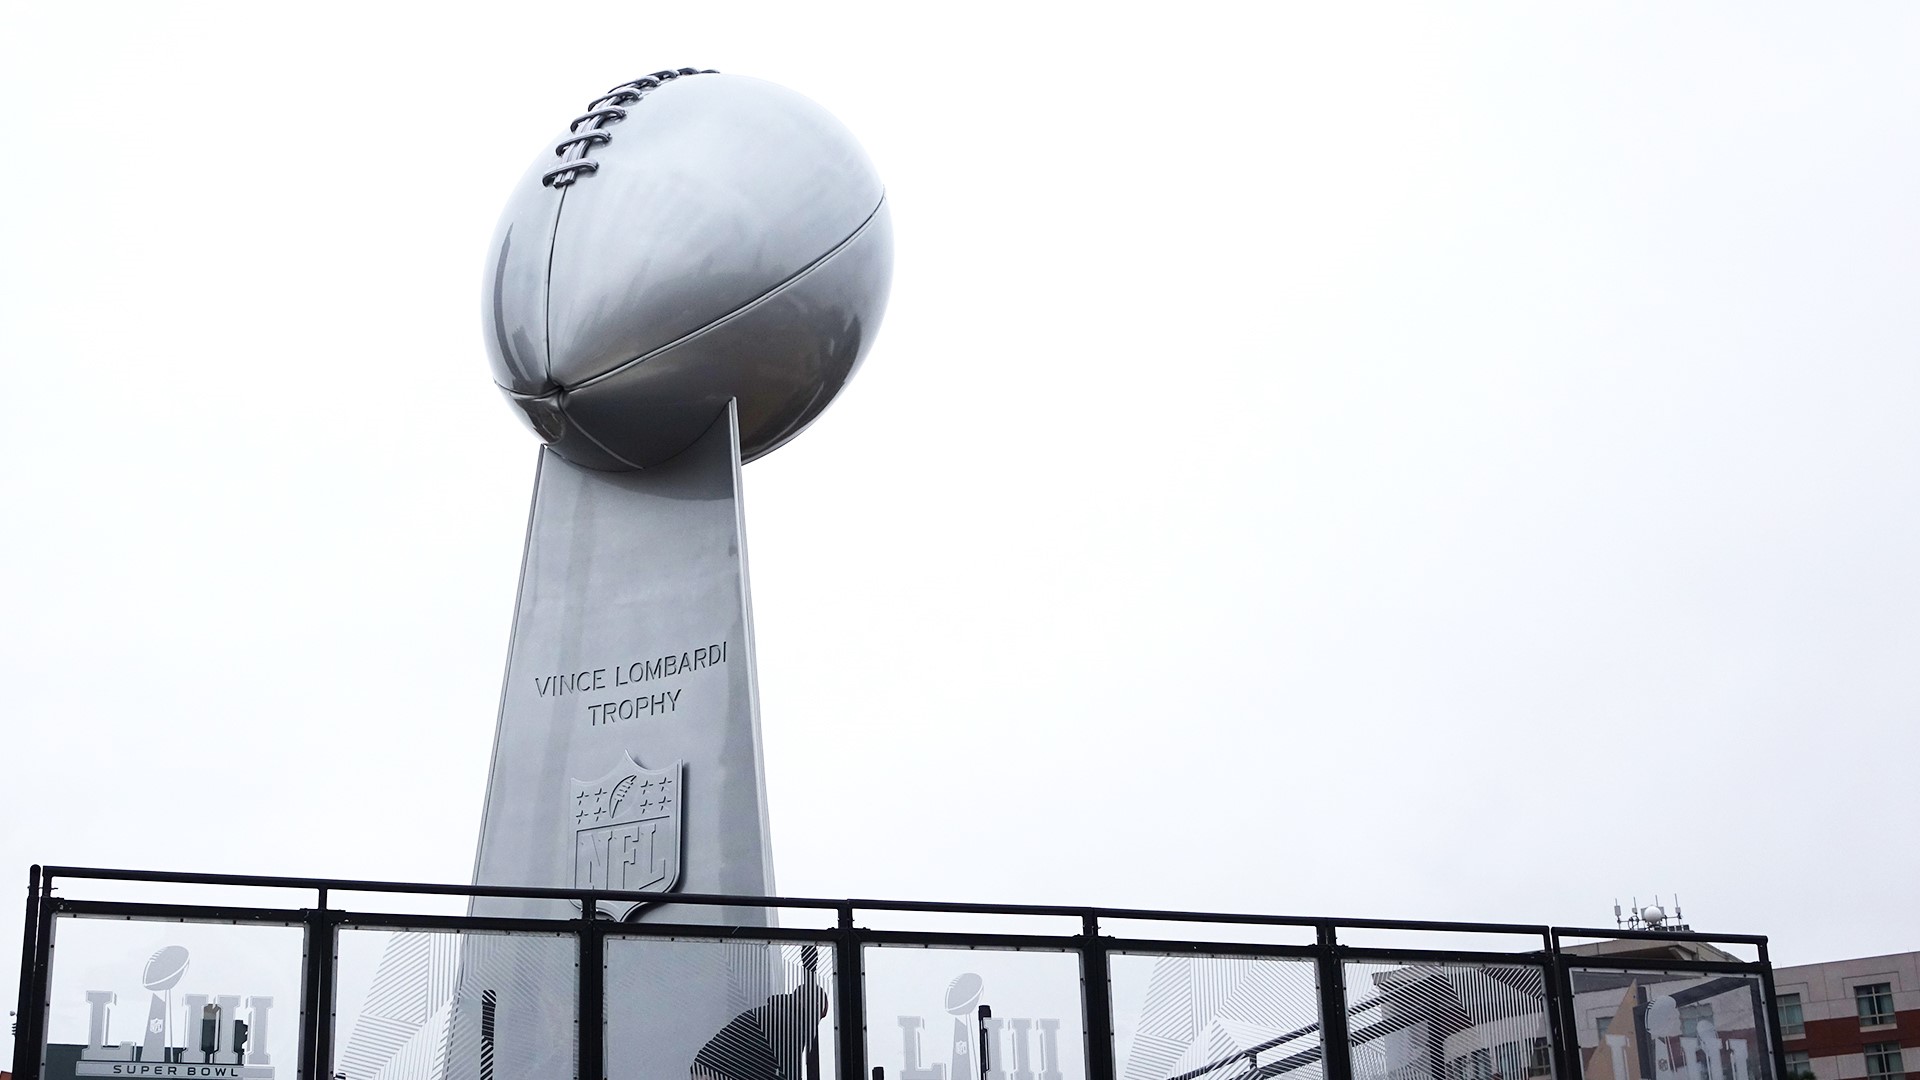 The 25-foot tall replica of the Vice Lombardi Super Bowl trophy is one of the most popular attractions at Super Bowl LIVE in Centennial Park, and built by a company in Duluth, Georgia.